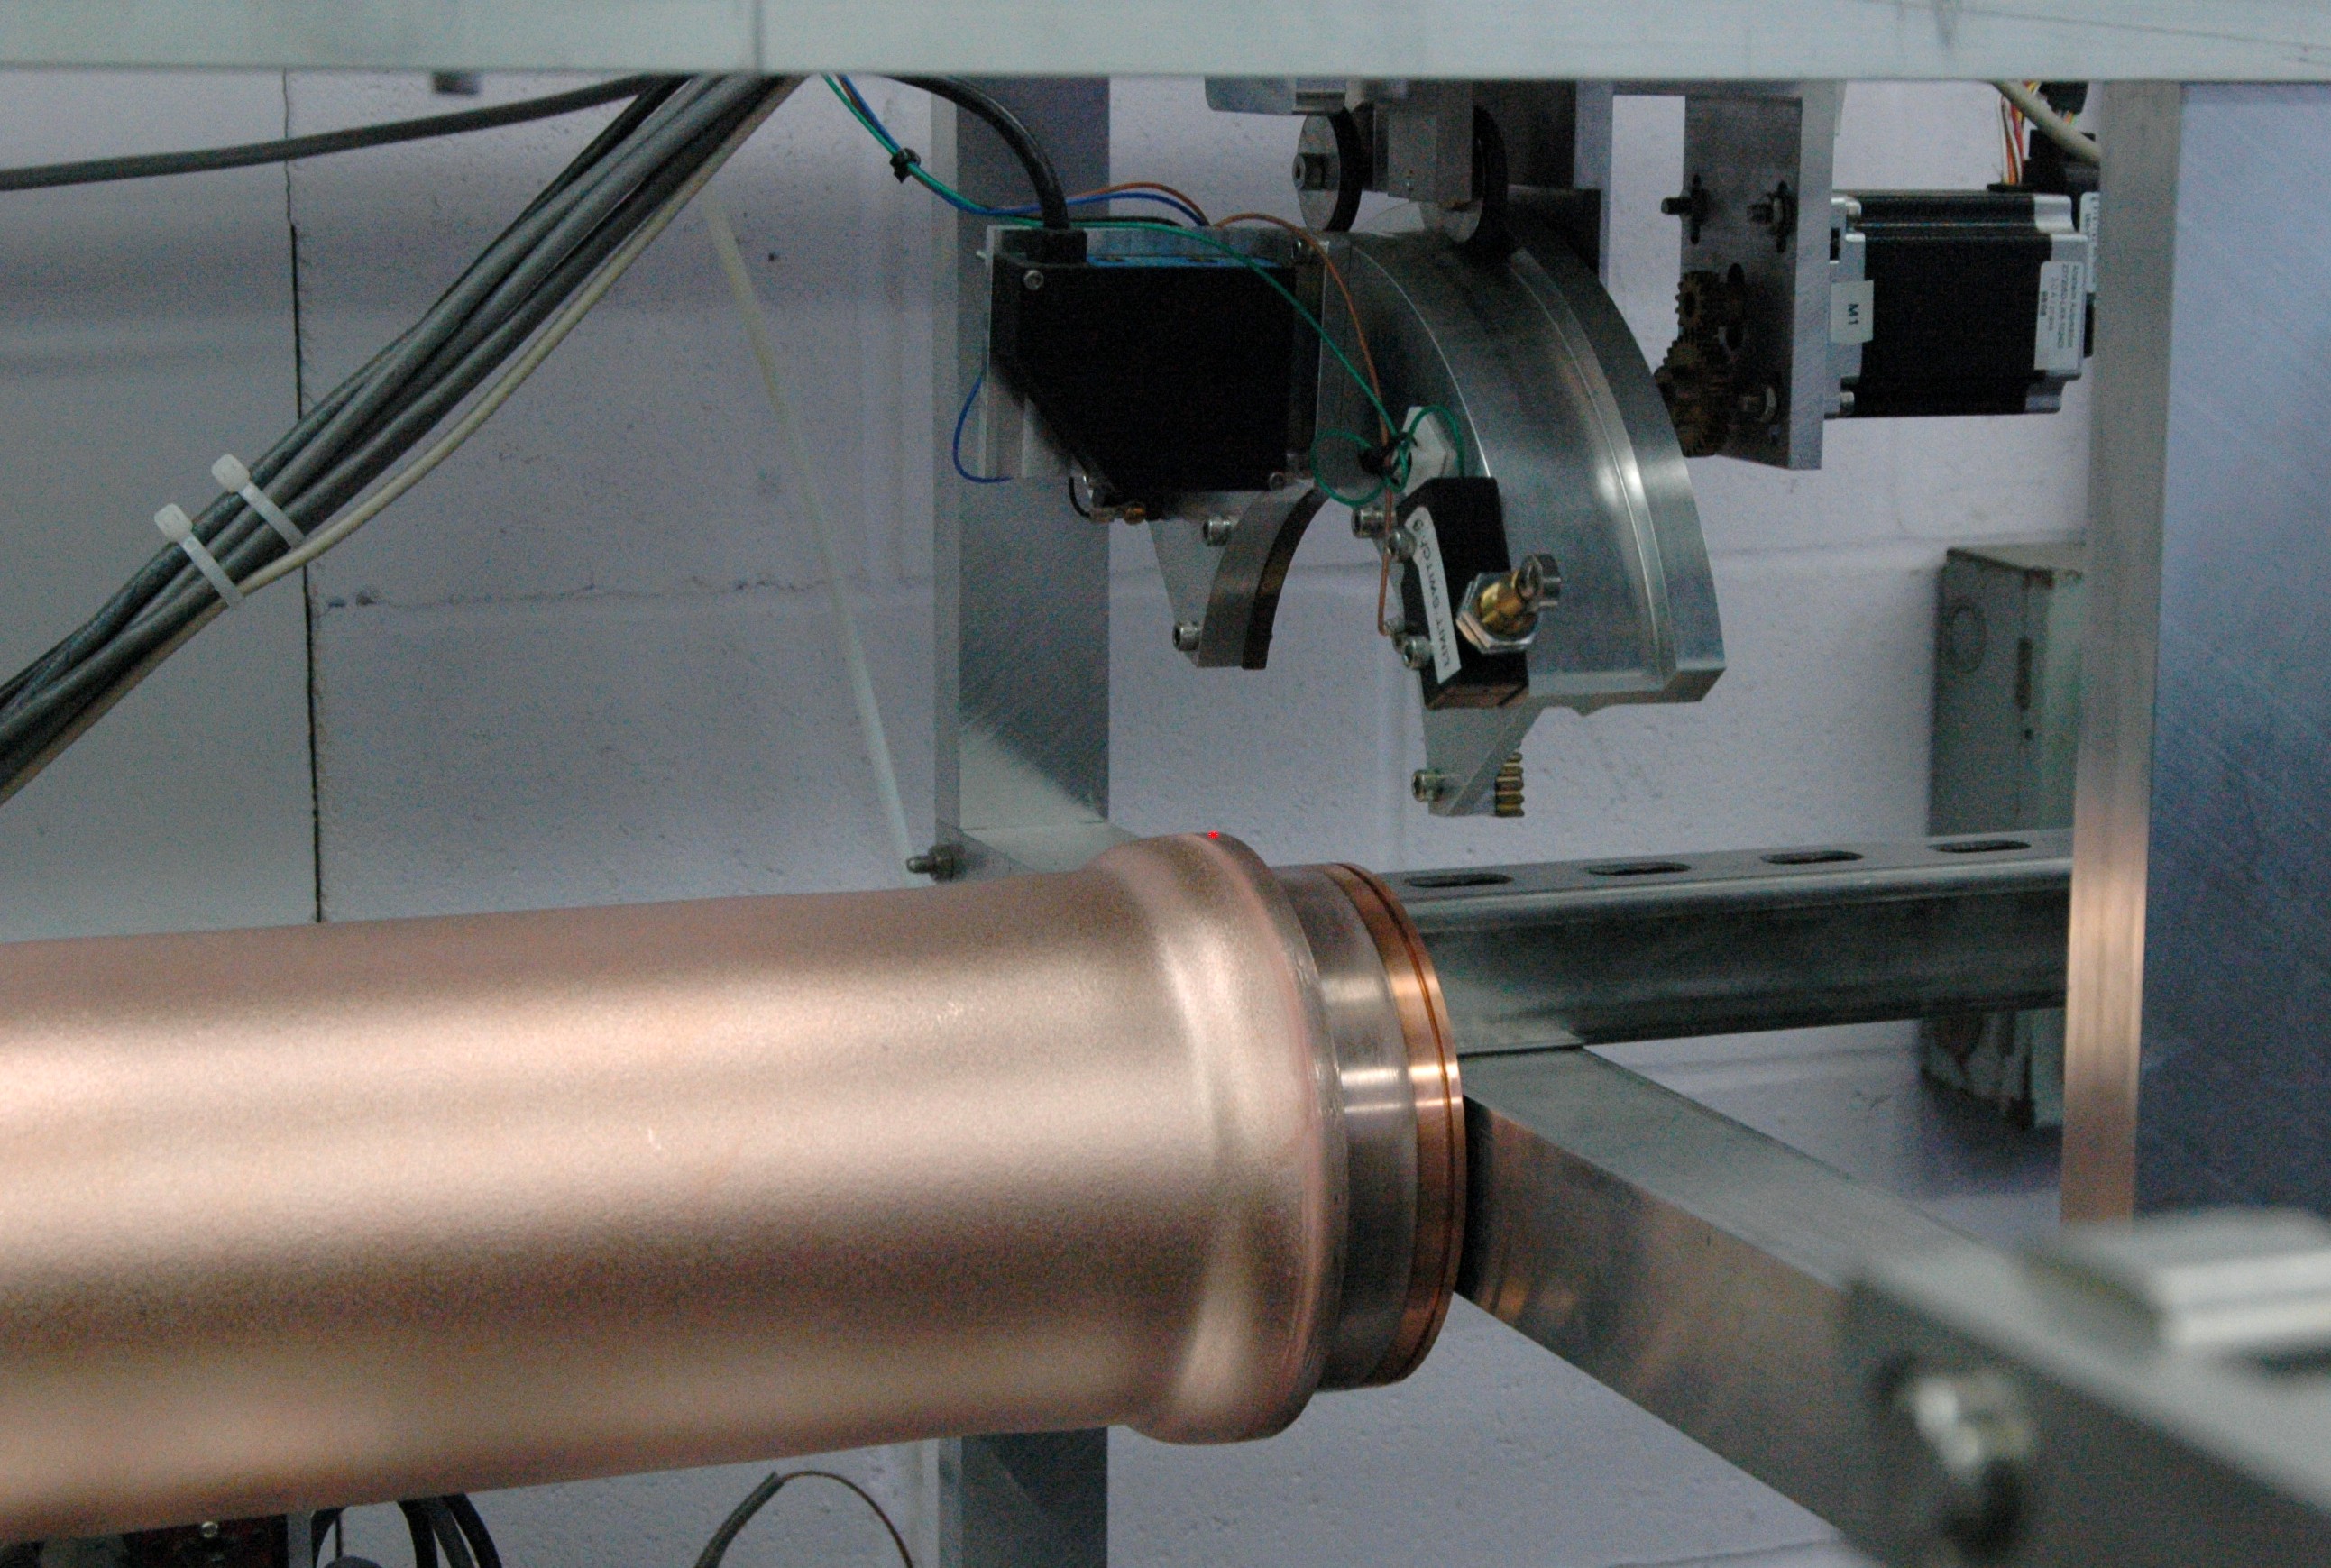 Cylindrical Copper Target Being Mapped with Displacement Sensor